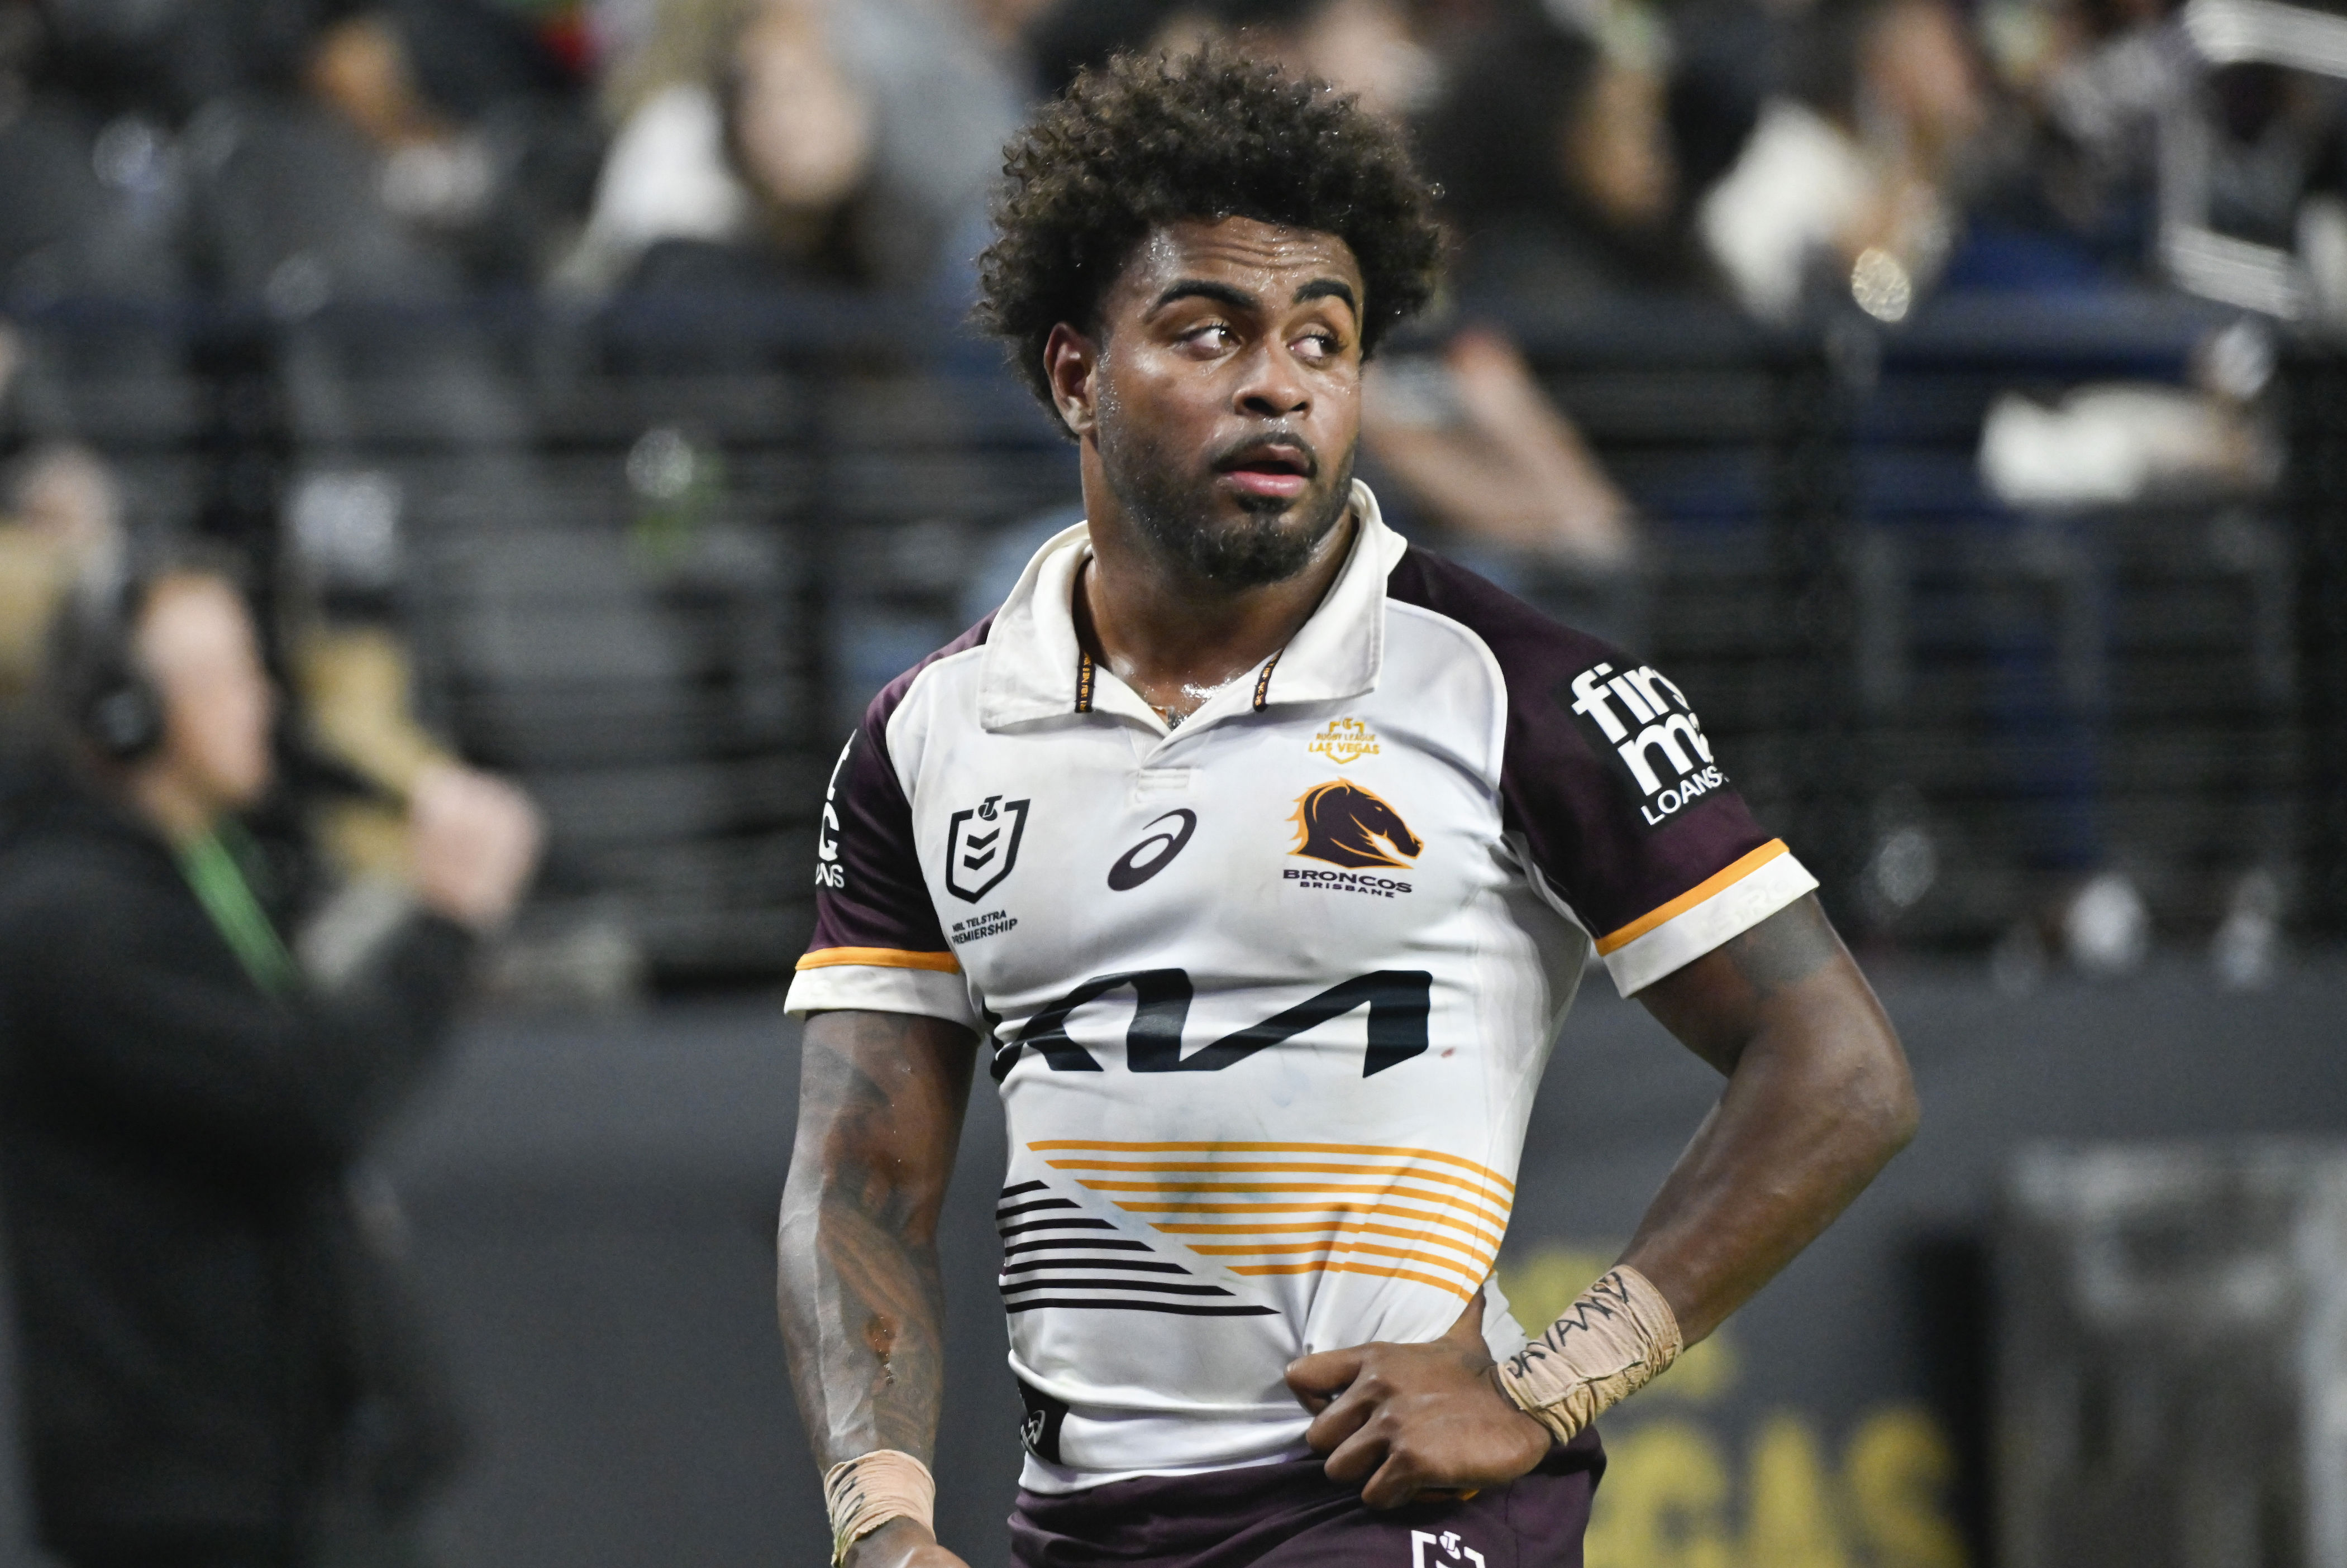 broncos star 'moving on' from ugly racism scandal